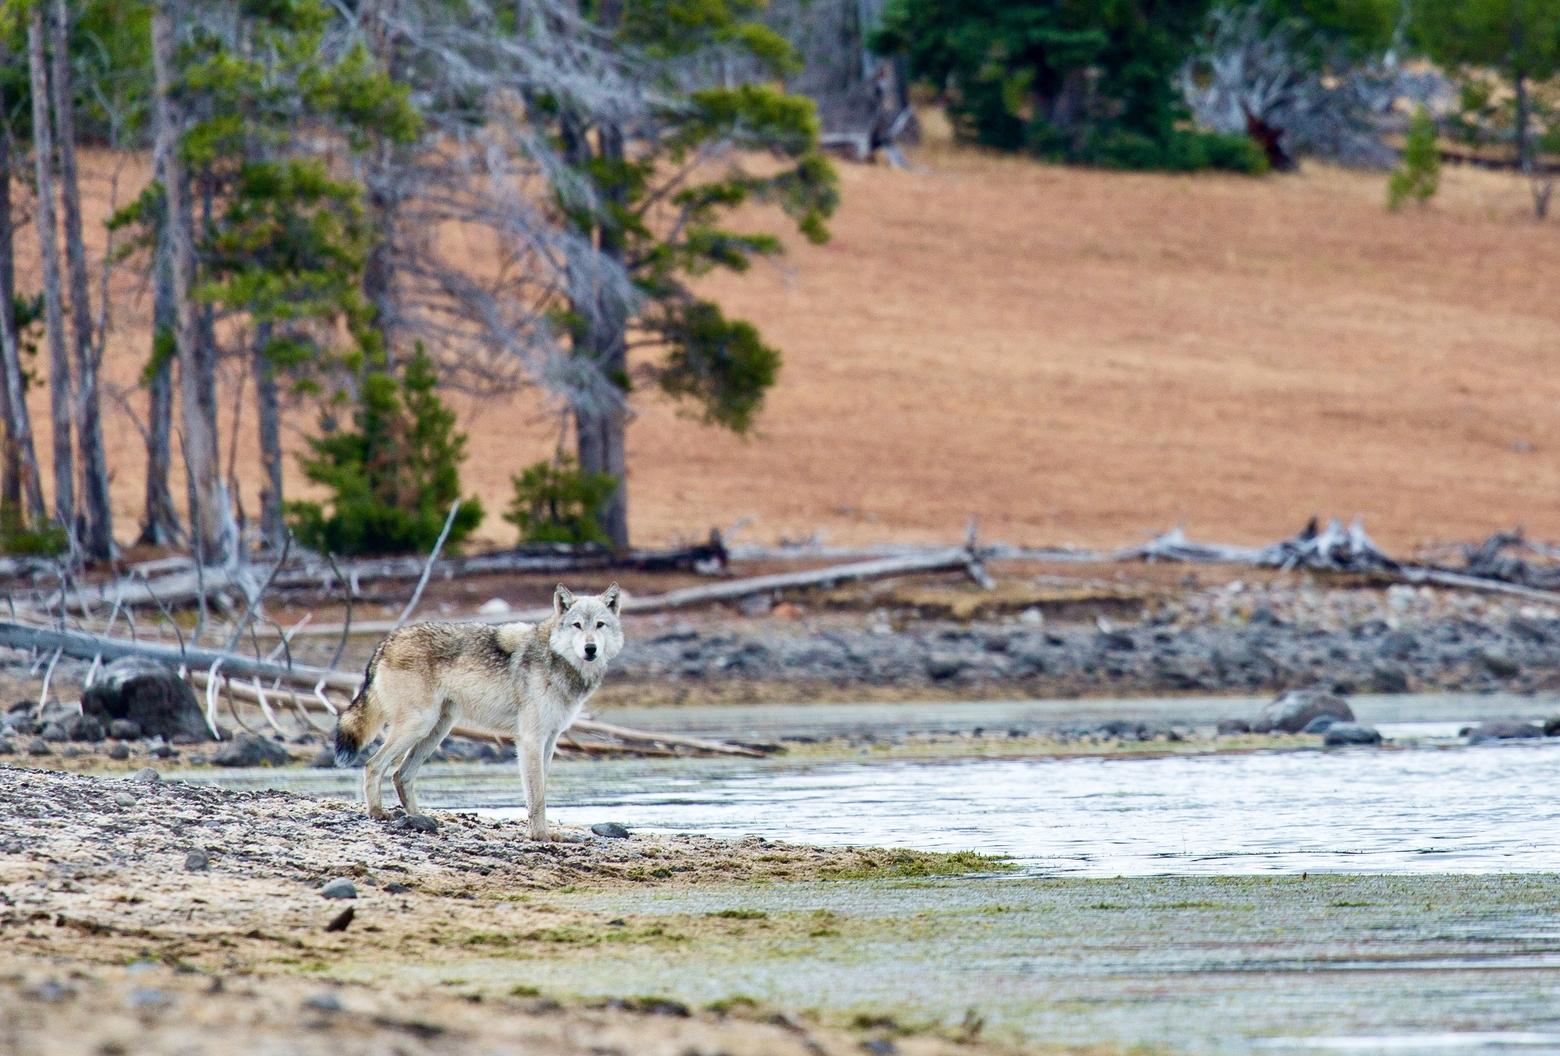 Wolves were extirpated from Yellowstone National Park by 1926. Since they were reintroduced into the park in 1995, they have had significant impacts on the ecosystem. Now, some scientists are saying wolves are only part of what's known as the trophic cascade. Here, a lone wolf stands on the shore of Yellowstone Lake. Photo by Neal Herbert/NPS